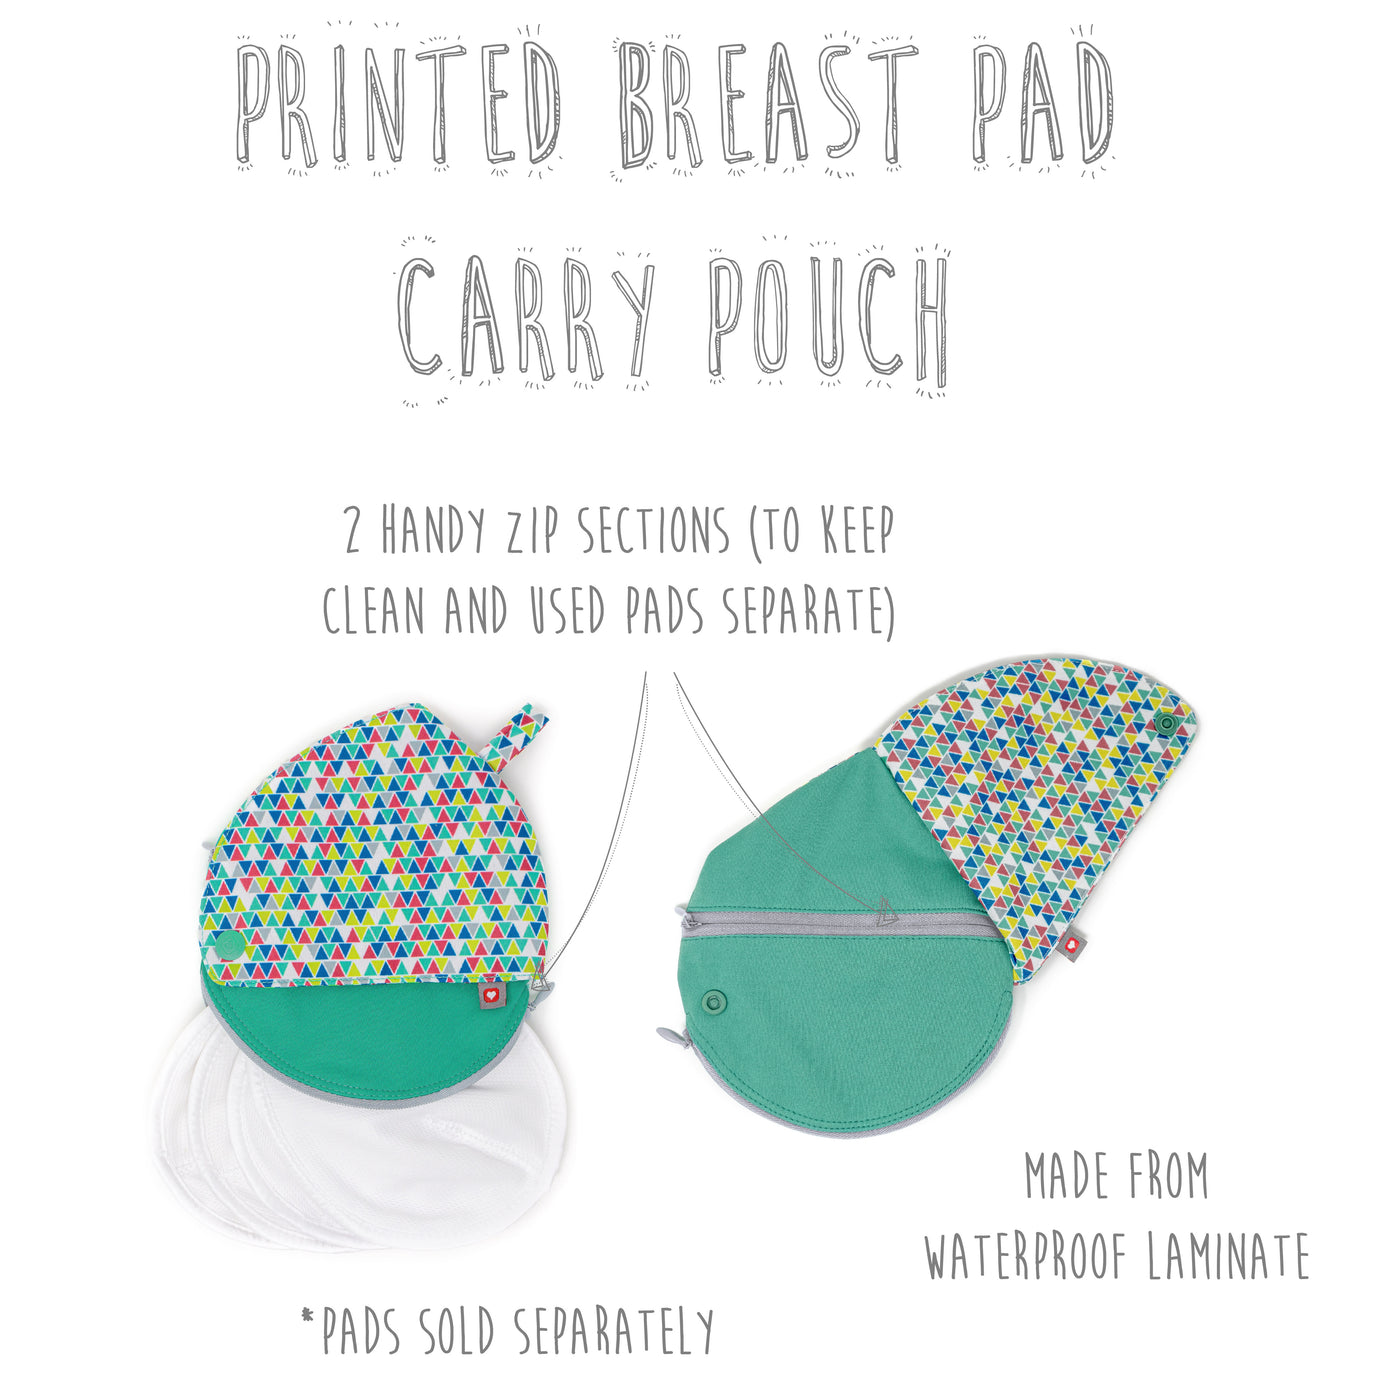 Close Pop-in Contoured Reusable Teardrop Bamboo Breast Pads and Shaped Wet/Dry Zipp able Storage Pouch